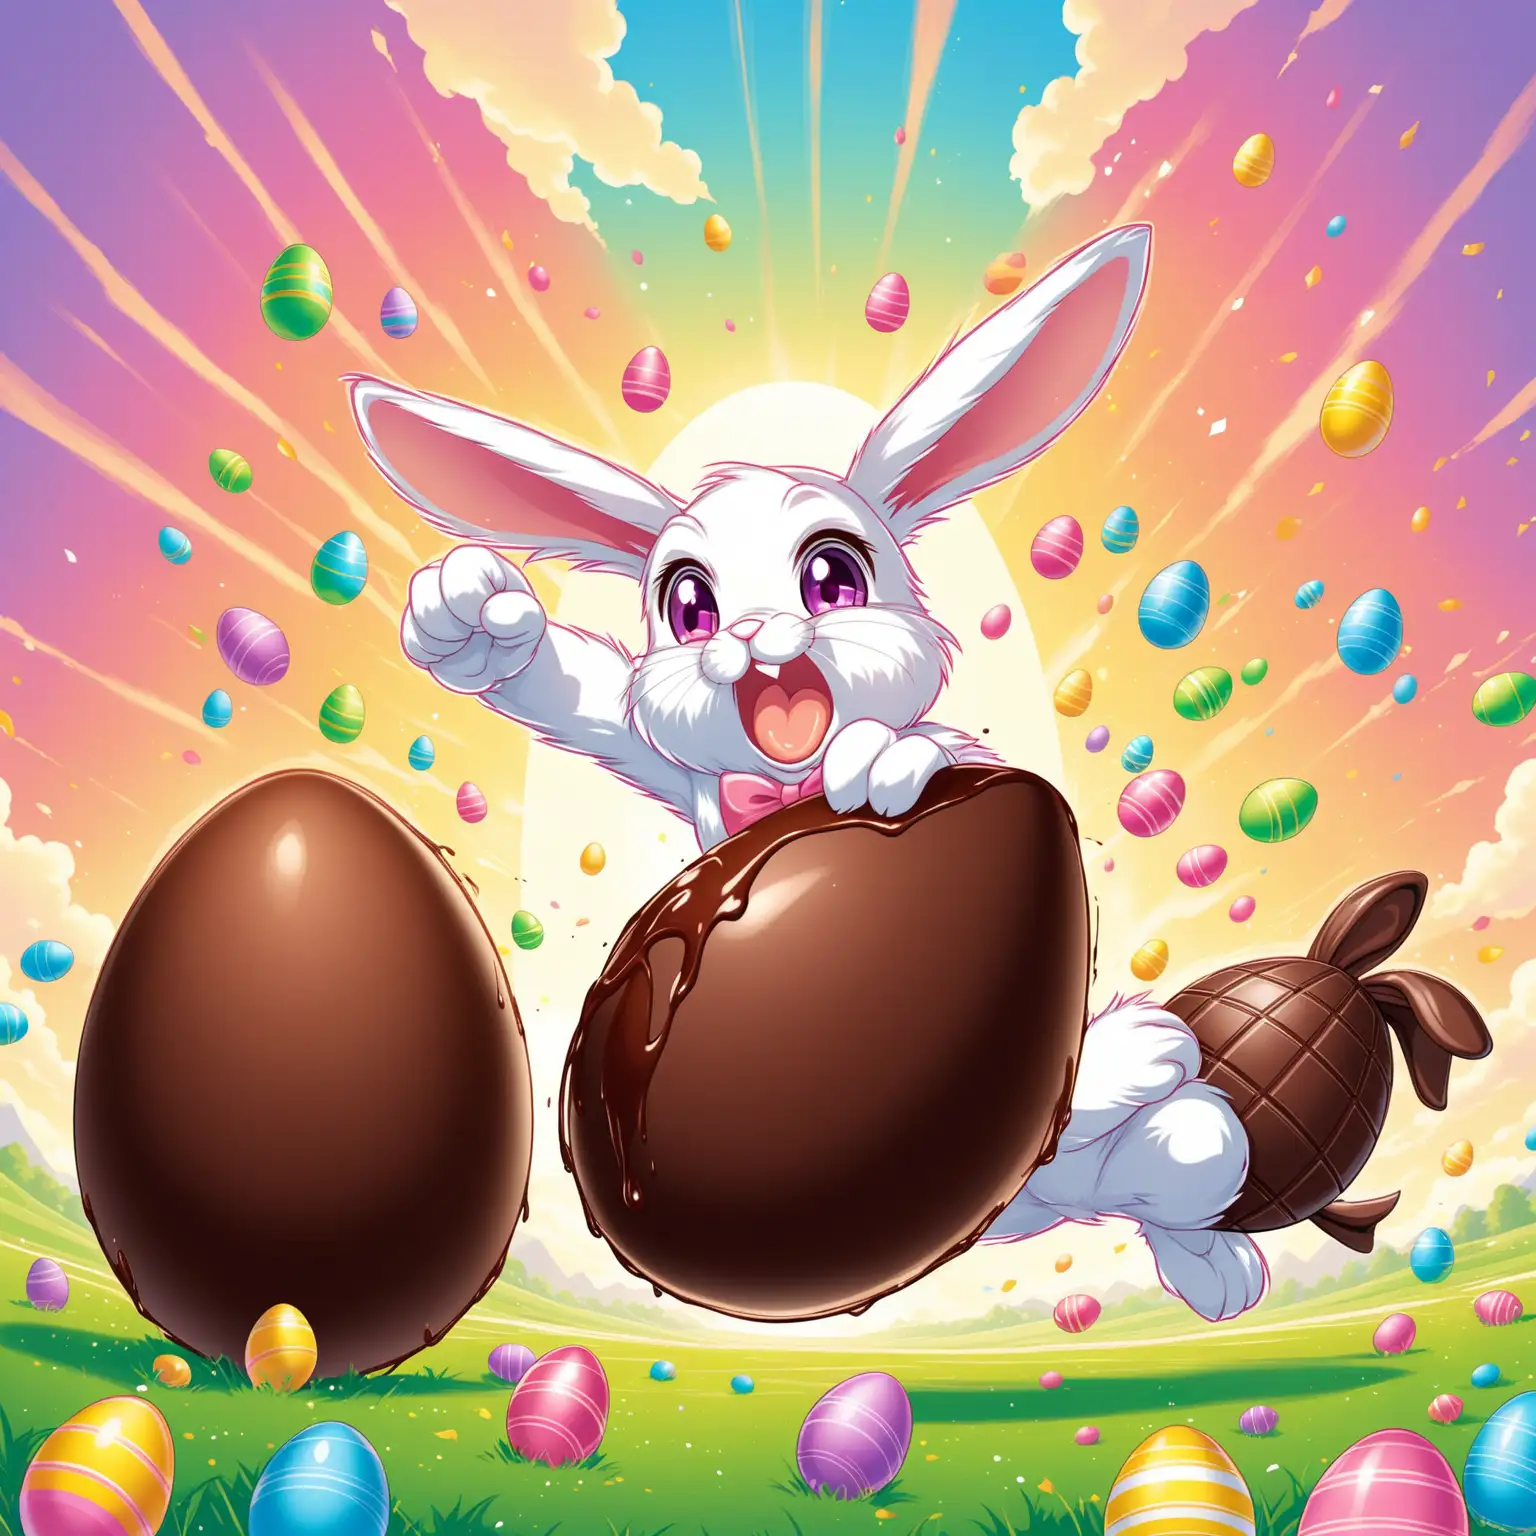 The Easter bunny fighting a big chocolate Egg